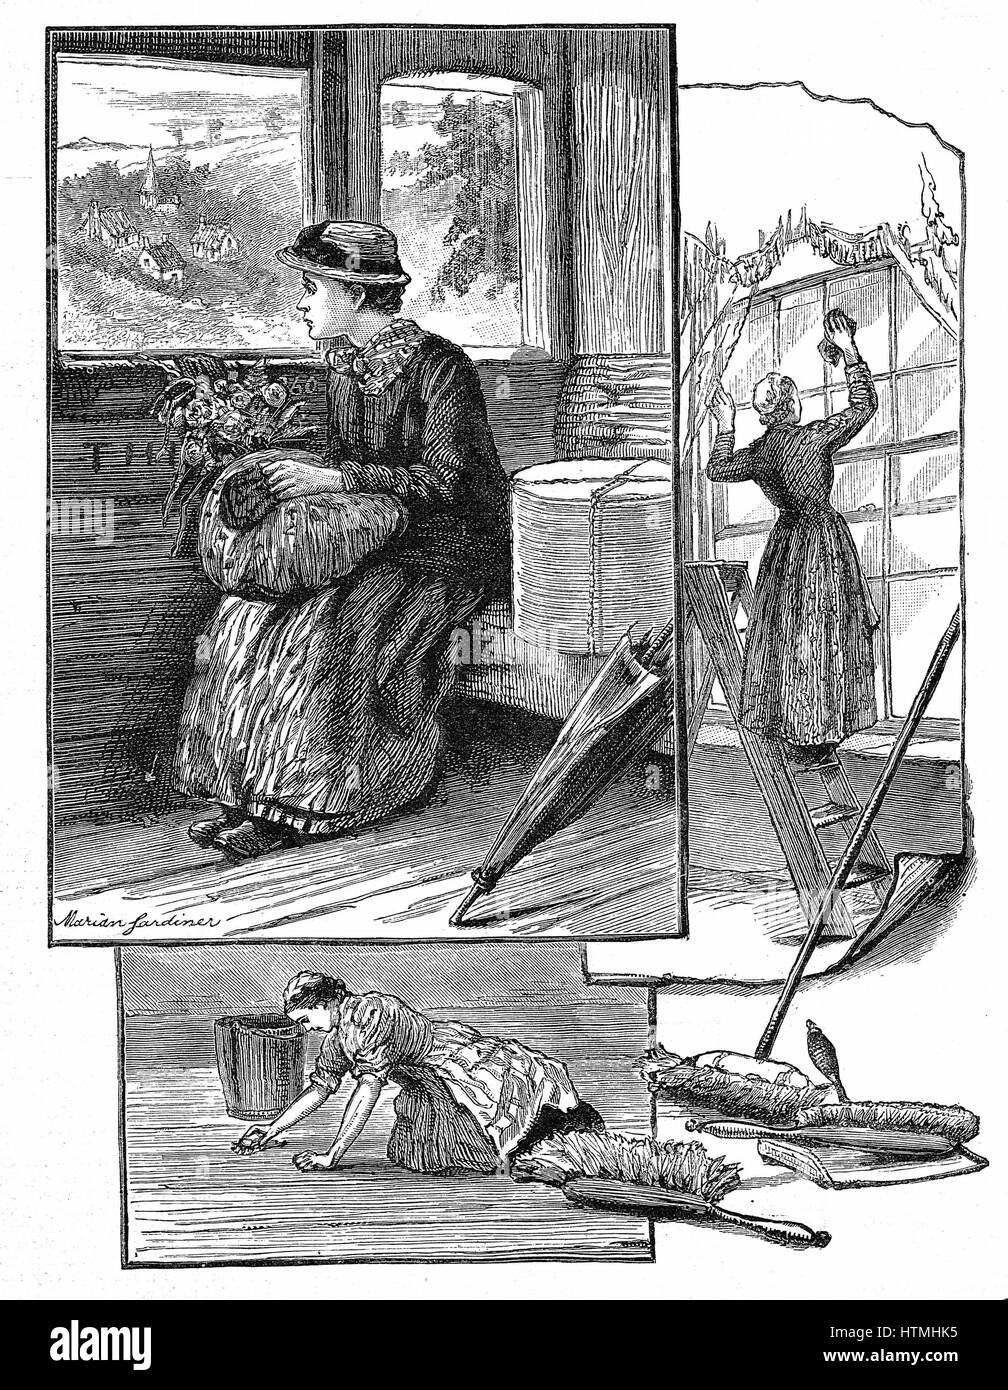 A country girl in railway carriage leaving home for the first time to go 'into service' as a maid in a city. Illustrated are some of her coming tasks such as scrubbing floors and cleaning windows. Illustration by Marian Gardiner. Wood engraving 1884 Stock Photo